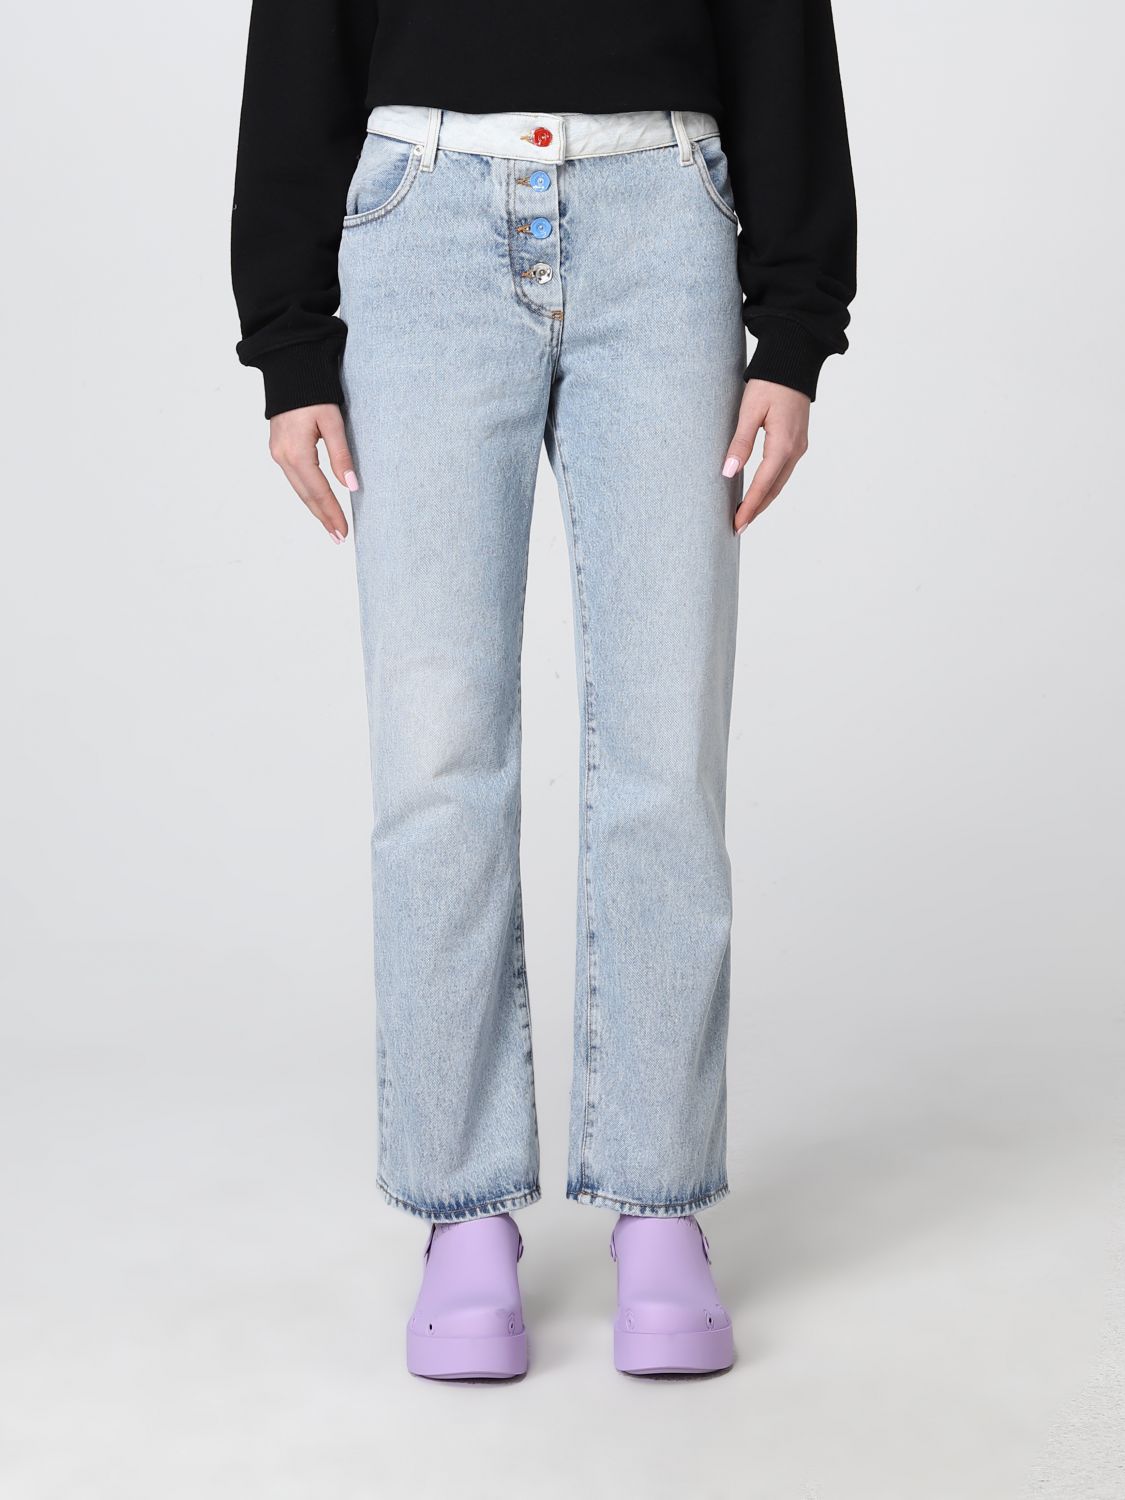 OFF-WHITE OFF WHITE JEANS IN WASHED DENIM,D08906009